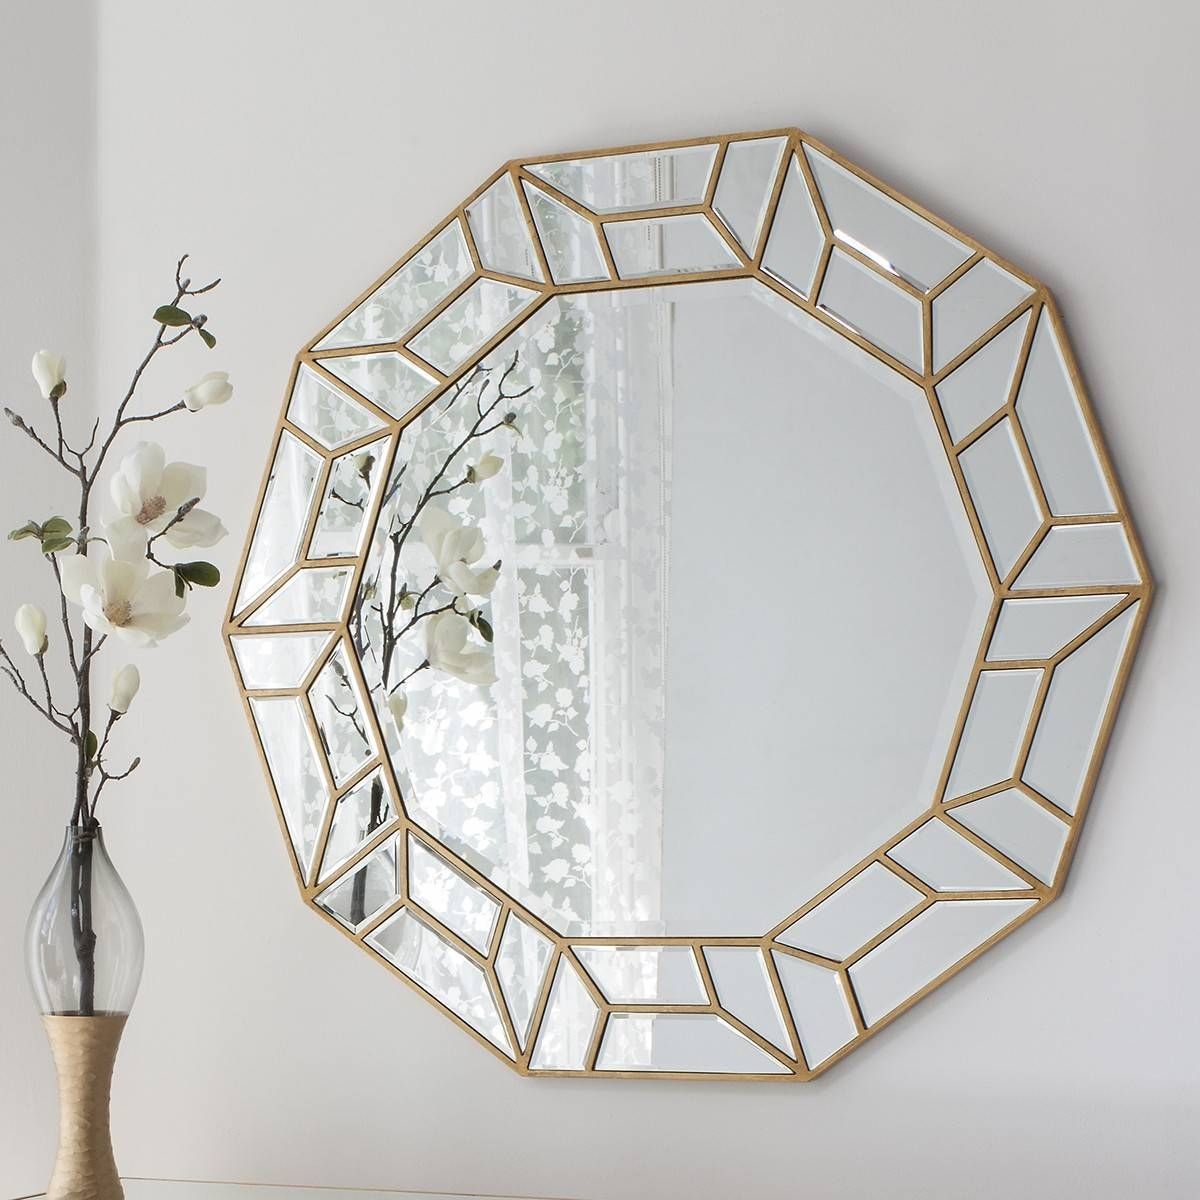 D'or Art Deco Mirror From £349 – Luxury Wall Mirrors | Ashden Road With Deco Mirrors (View 6 of 15)